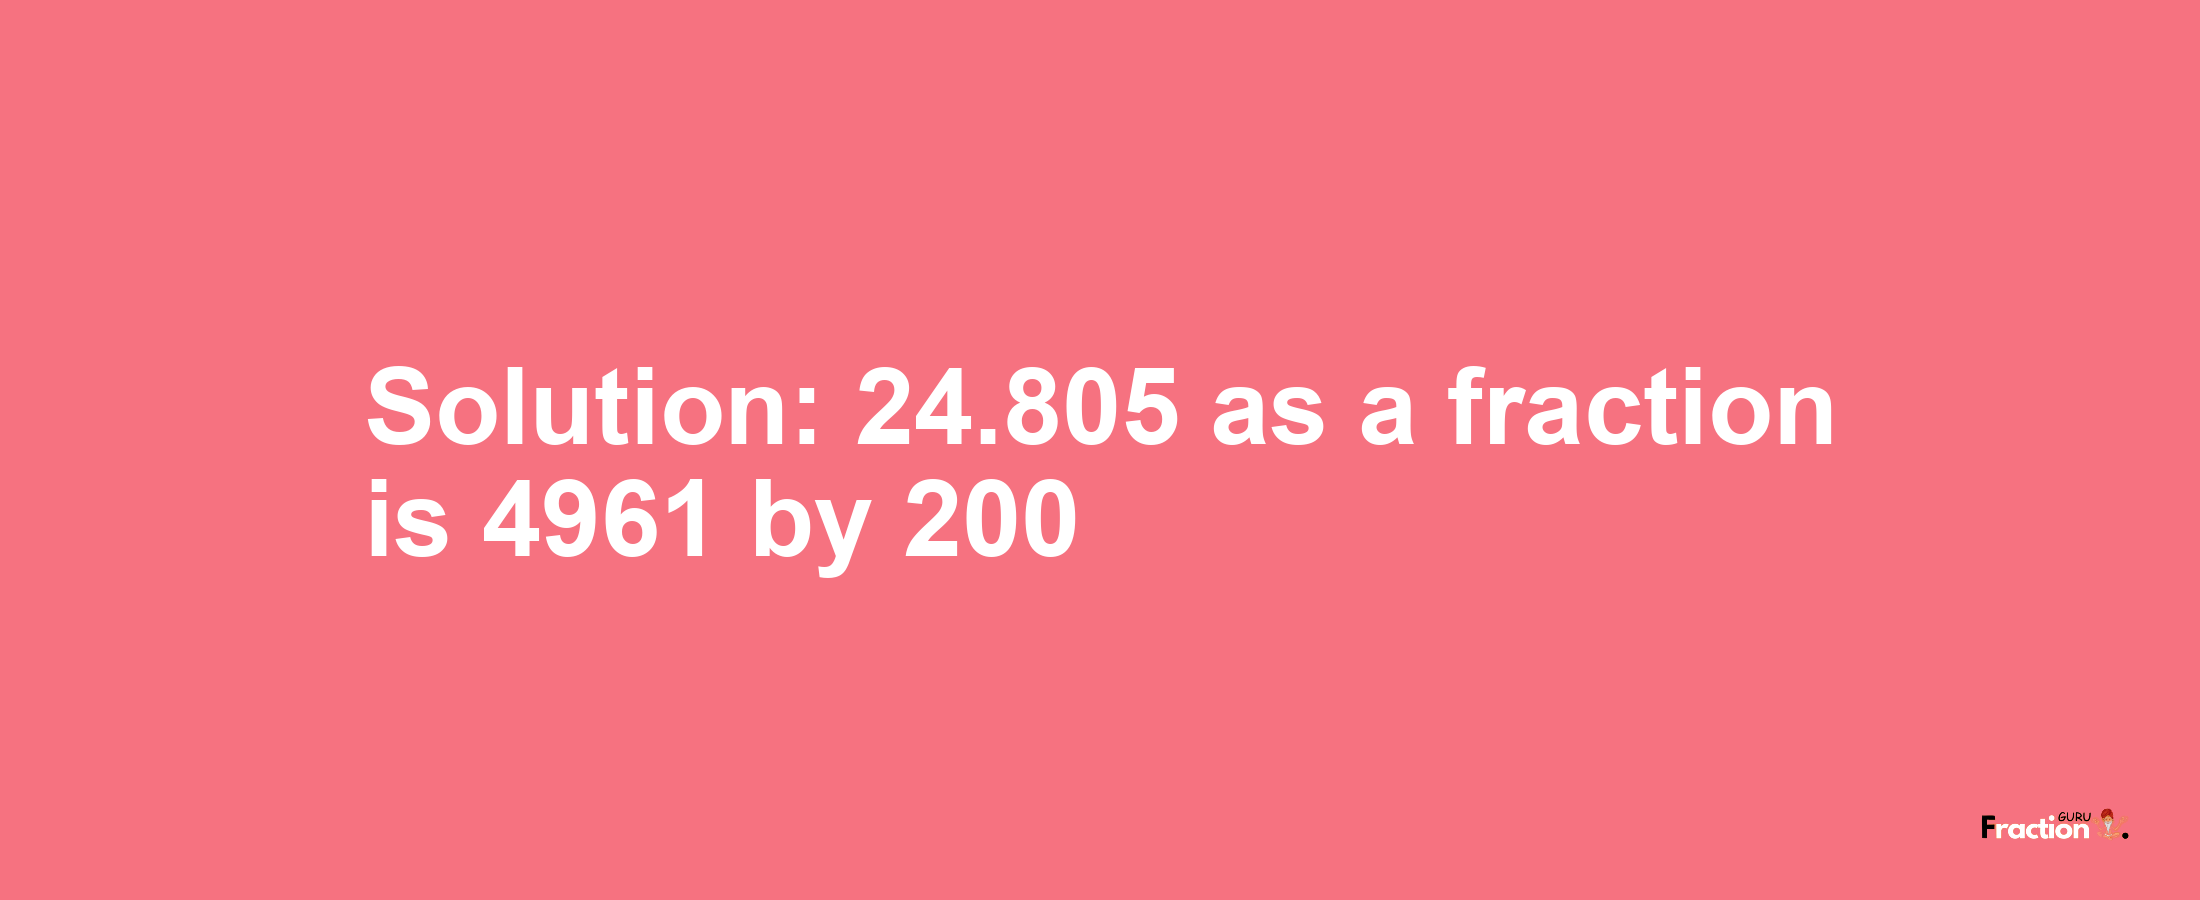 Solution:24.805 as a fraction is 4961/200